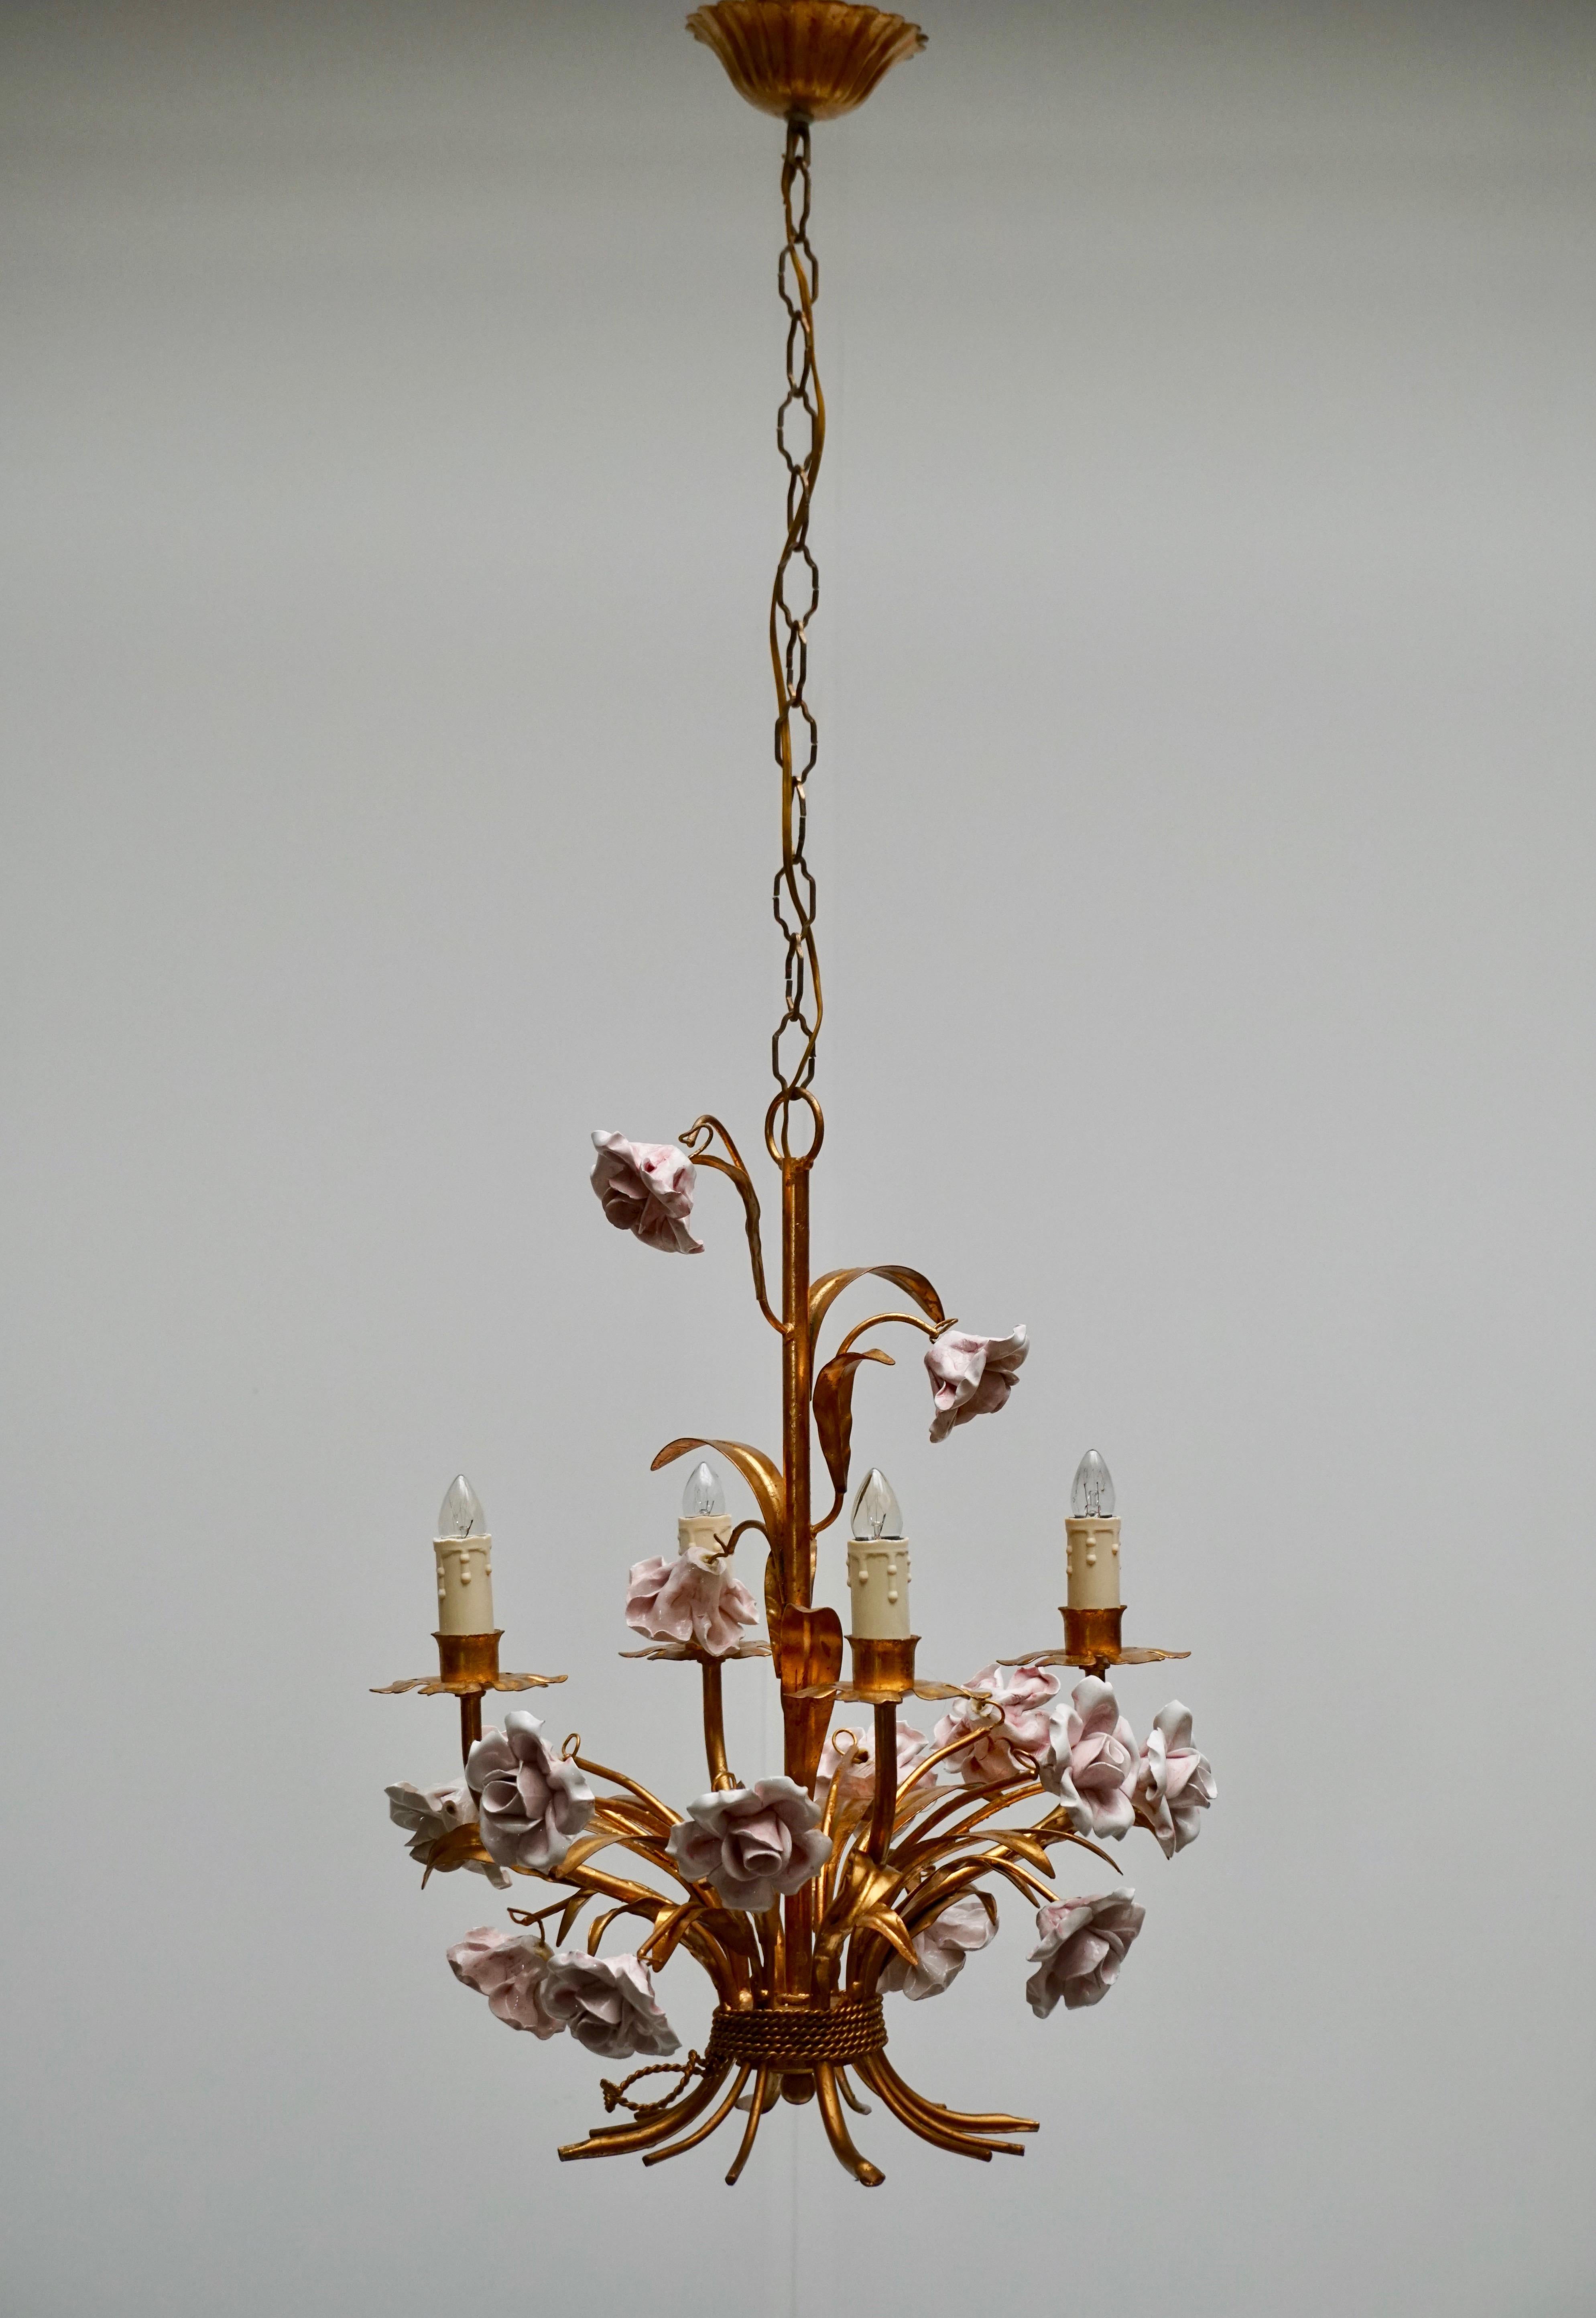 Italian Hollywood Regency brass gilt chandelier with pink porcelain flowers.
Measures: Diameter 40 cm.
Height fixture 52 cm.
The total height including the chain and canopy is 100 cm.